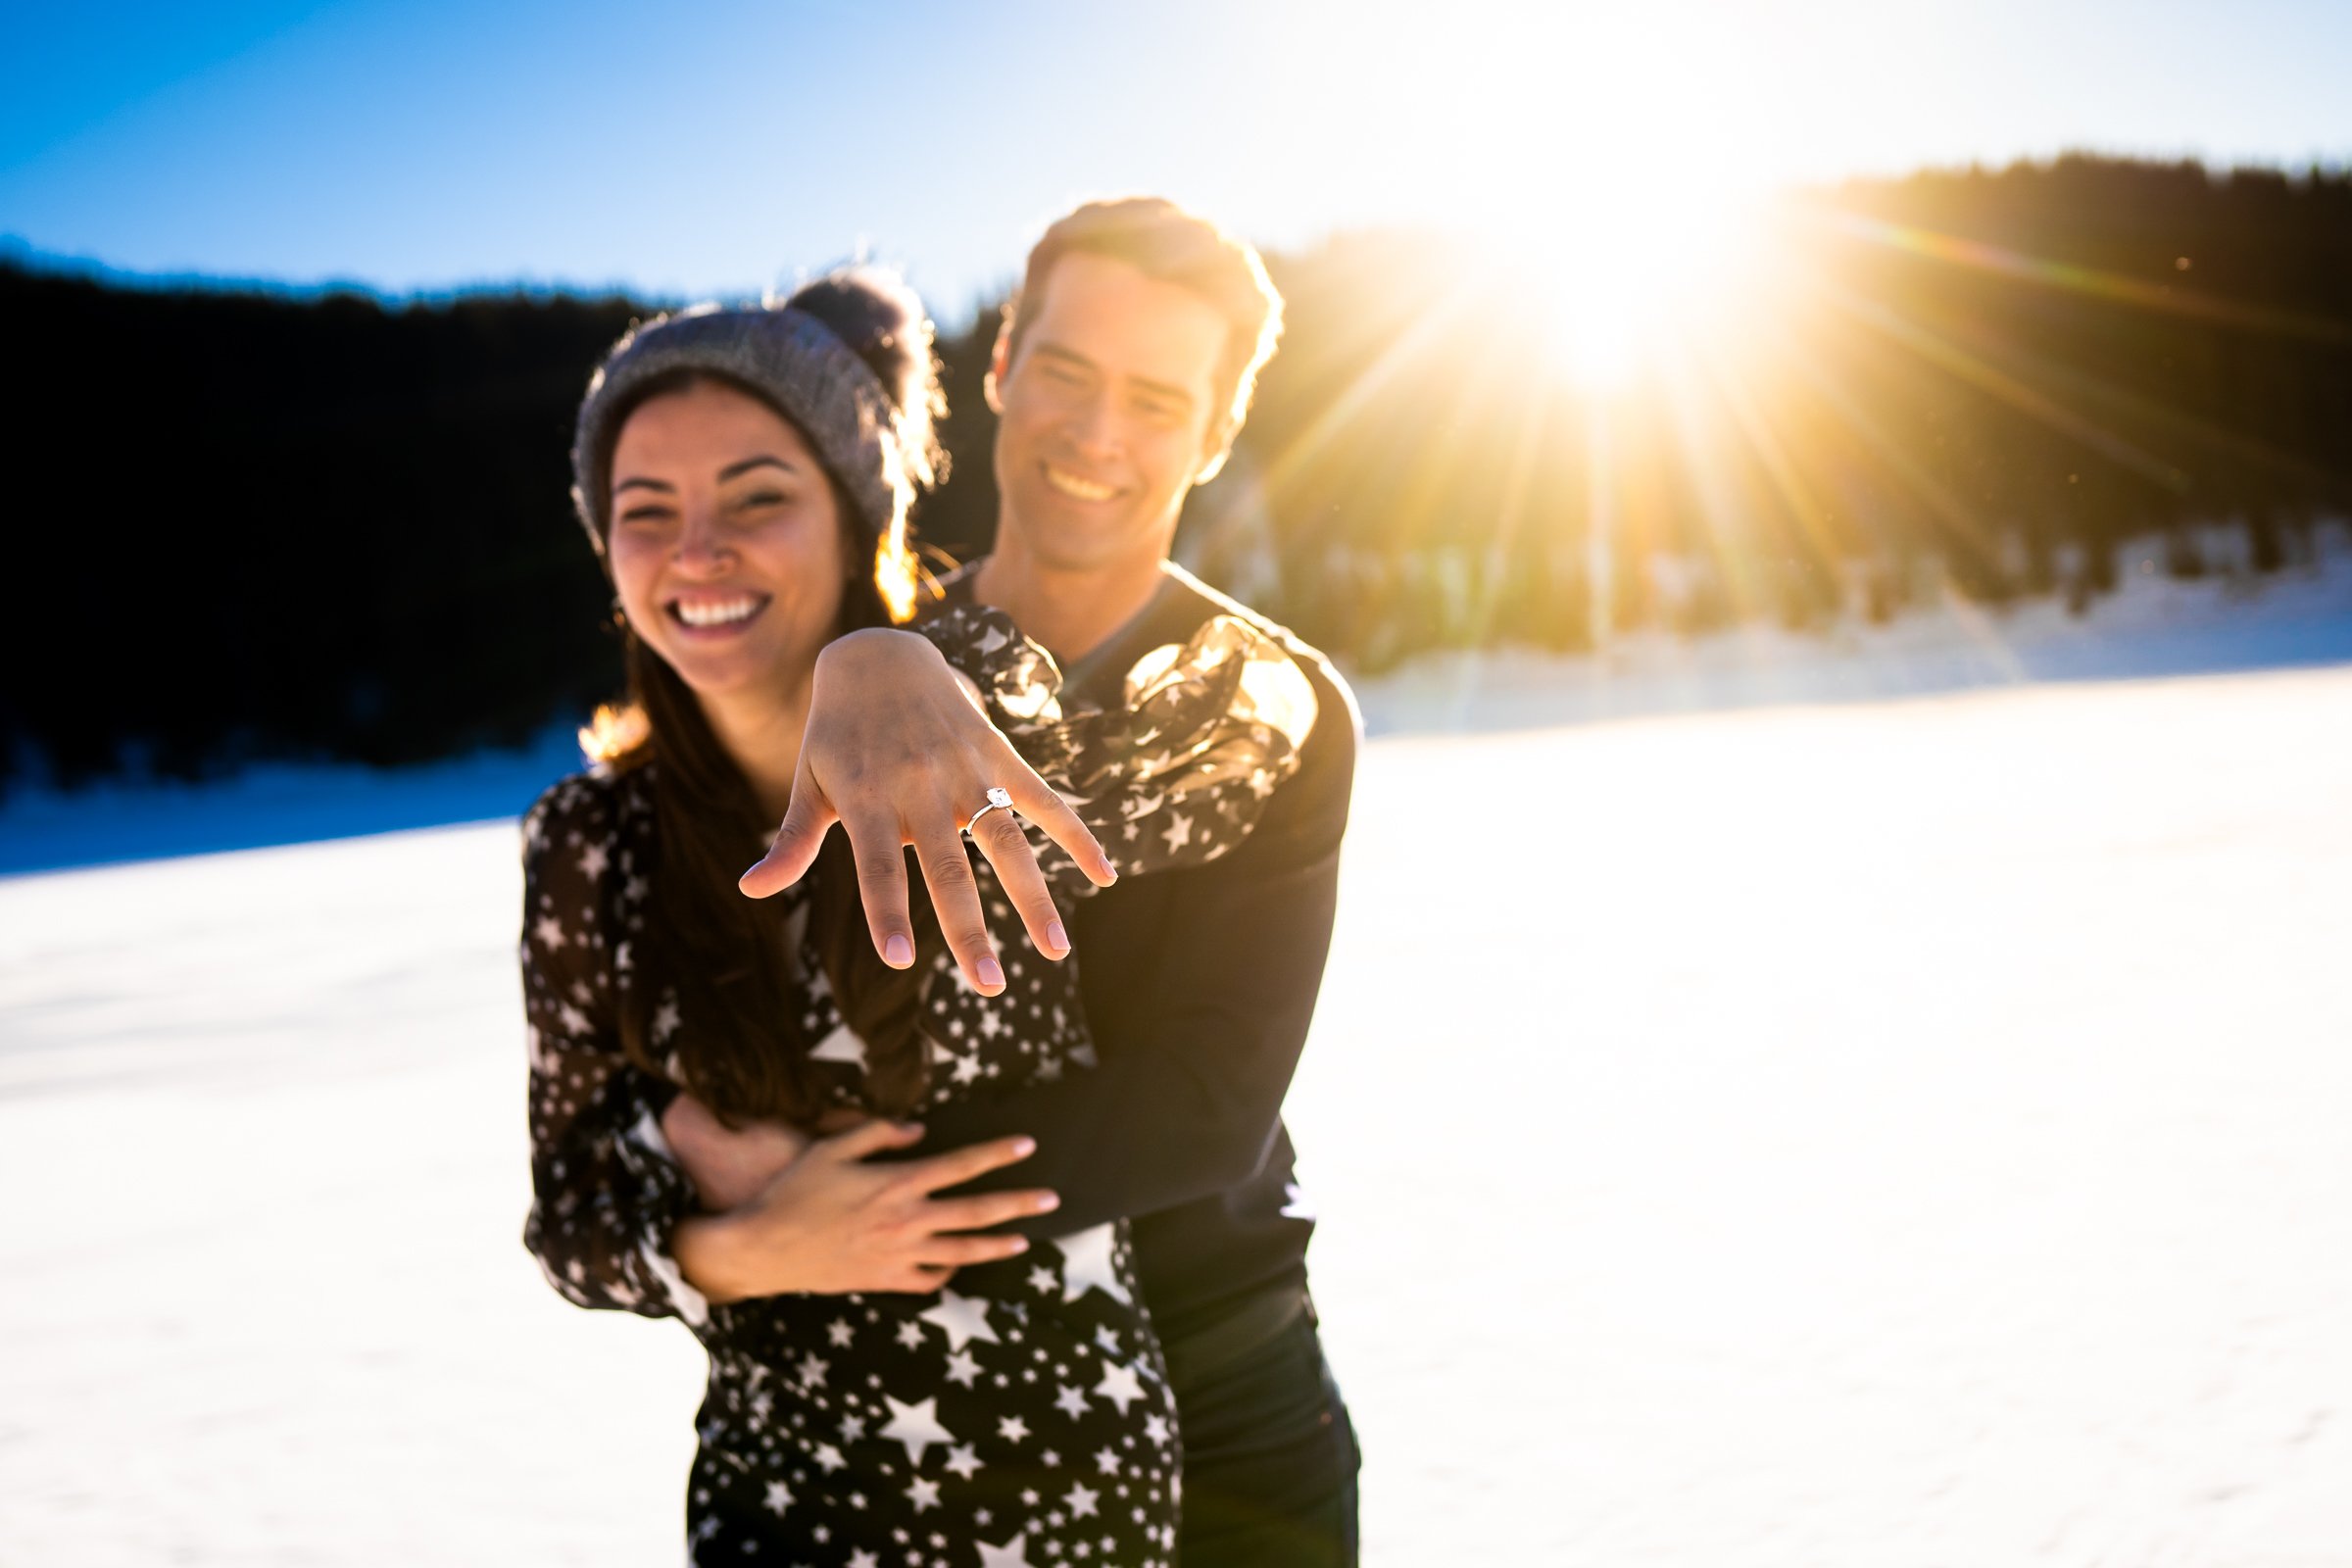 Newly engaged couple celebrate their proposal on a frozen lake with snowcapped mountains in the background, Engagement Session, Engagement Photos, Engagement Photos Inspiration, Engagement Photography, Engagement Photographer, Winter Engagement Photos, Proposal Photos, Proposal Photographer, Proposal Photography, Winter Proposal, Mountain Proposal, Proposal Inspiration, Summit County engagement session, Summit County engagement photos, Summit County engagement photography, Summit County engagement photographer, Summit County engagement inspiration, Colorado engagement session, Colorado engagement photos, Colorado engagement photography, Colorado engagement photographer, Colorado engagement inspiration, Clinton Gulch Engagement